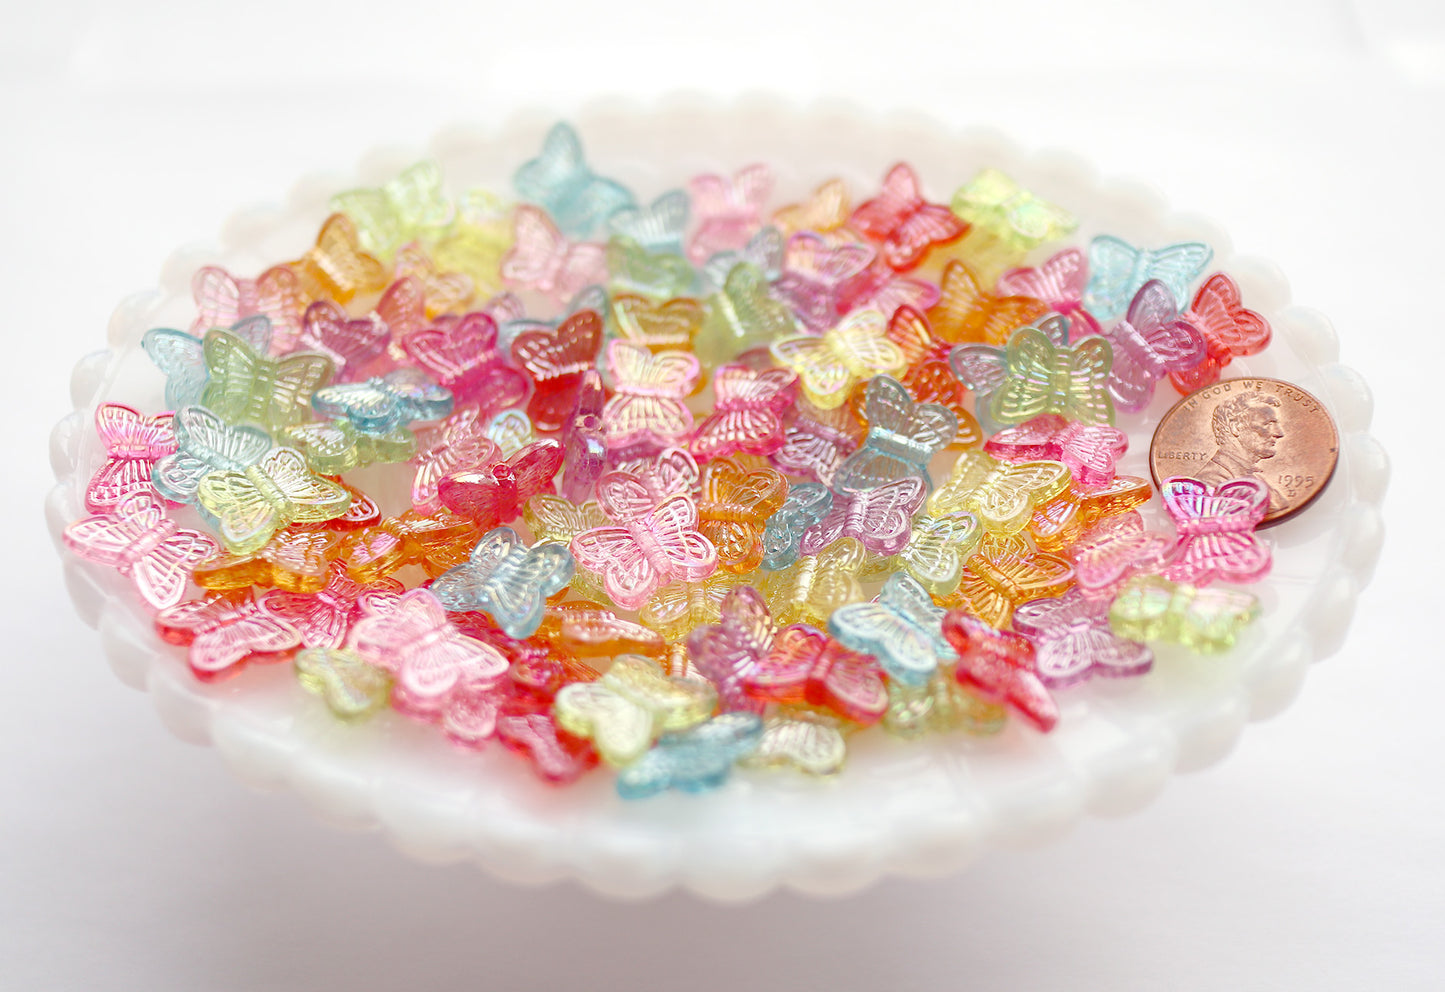 Butterfly Beads - 14mm AB Translucent Iridescent Color Little Butterfly Shaped Resin or Acrylic Beads - 100 pc set